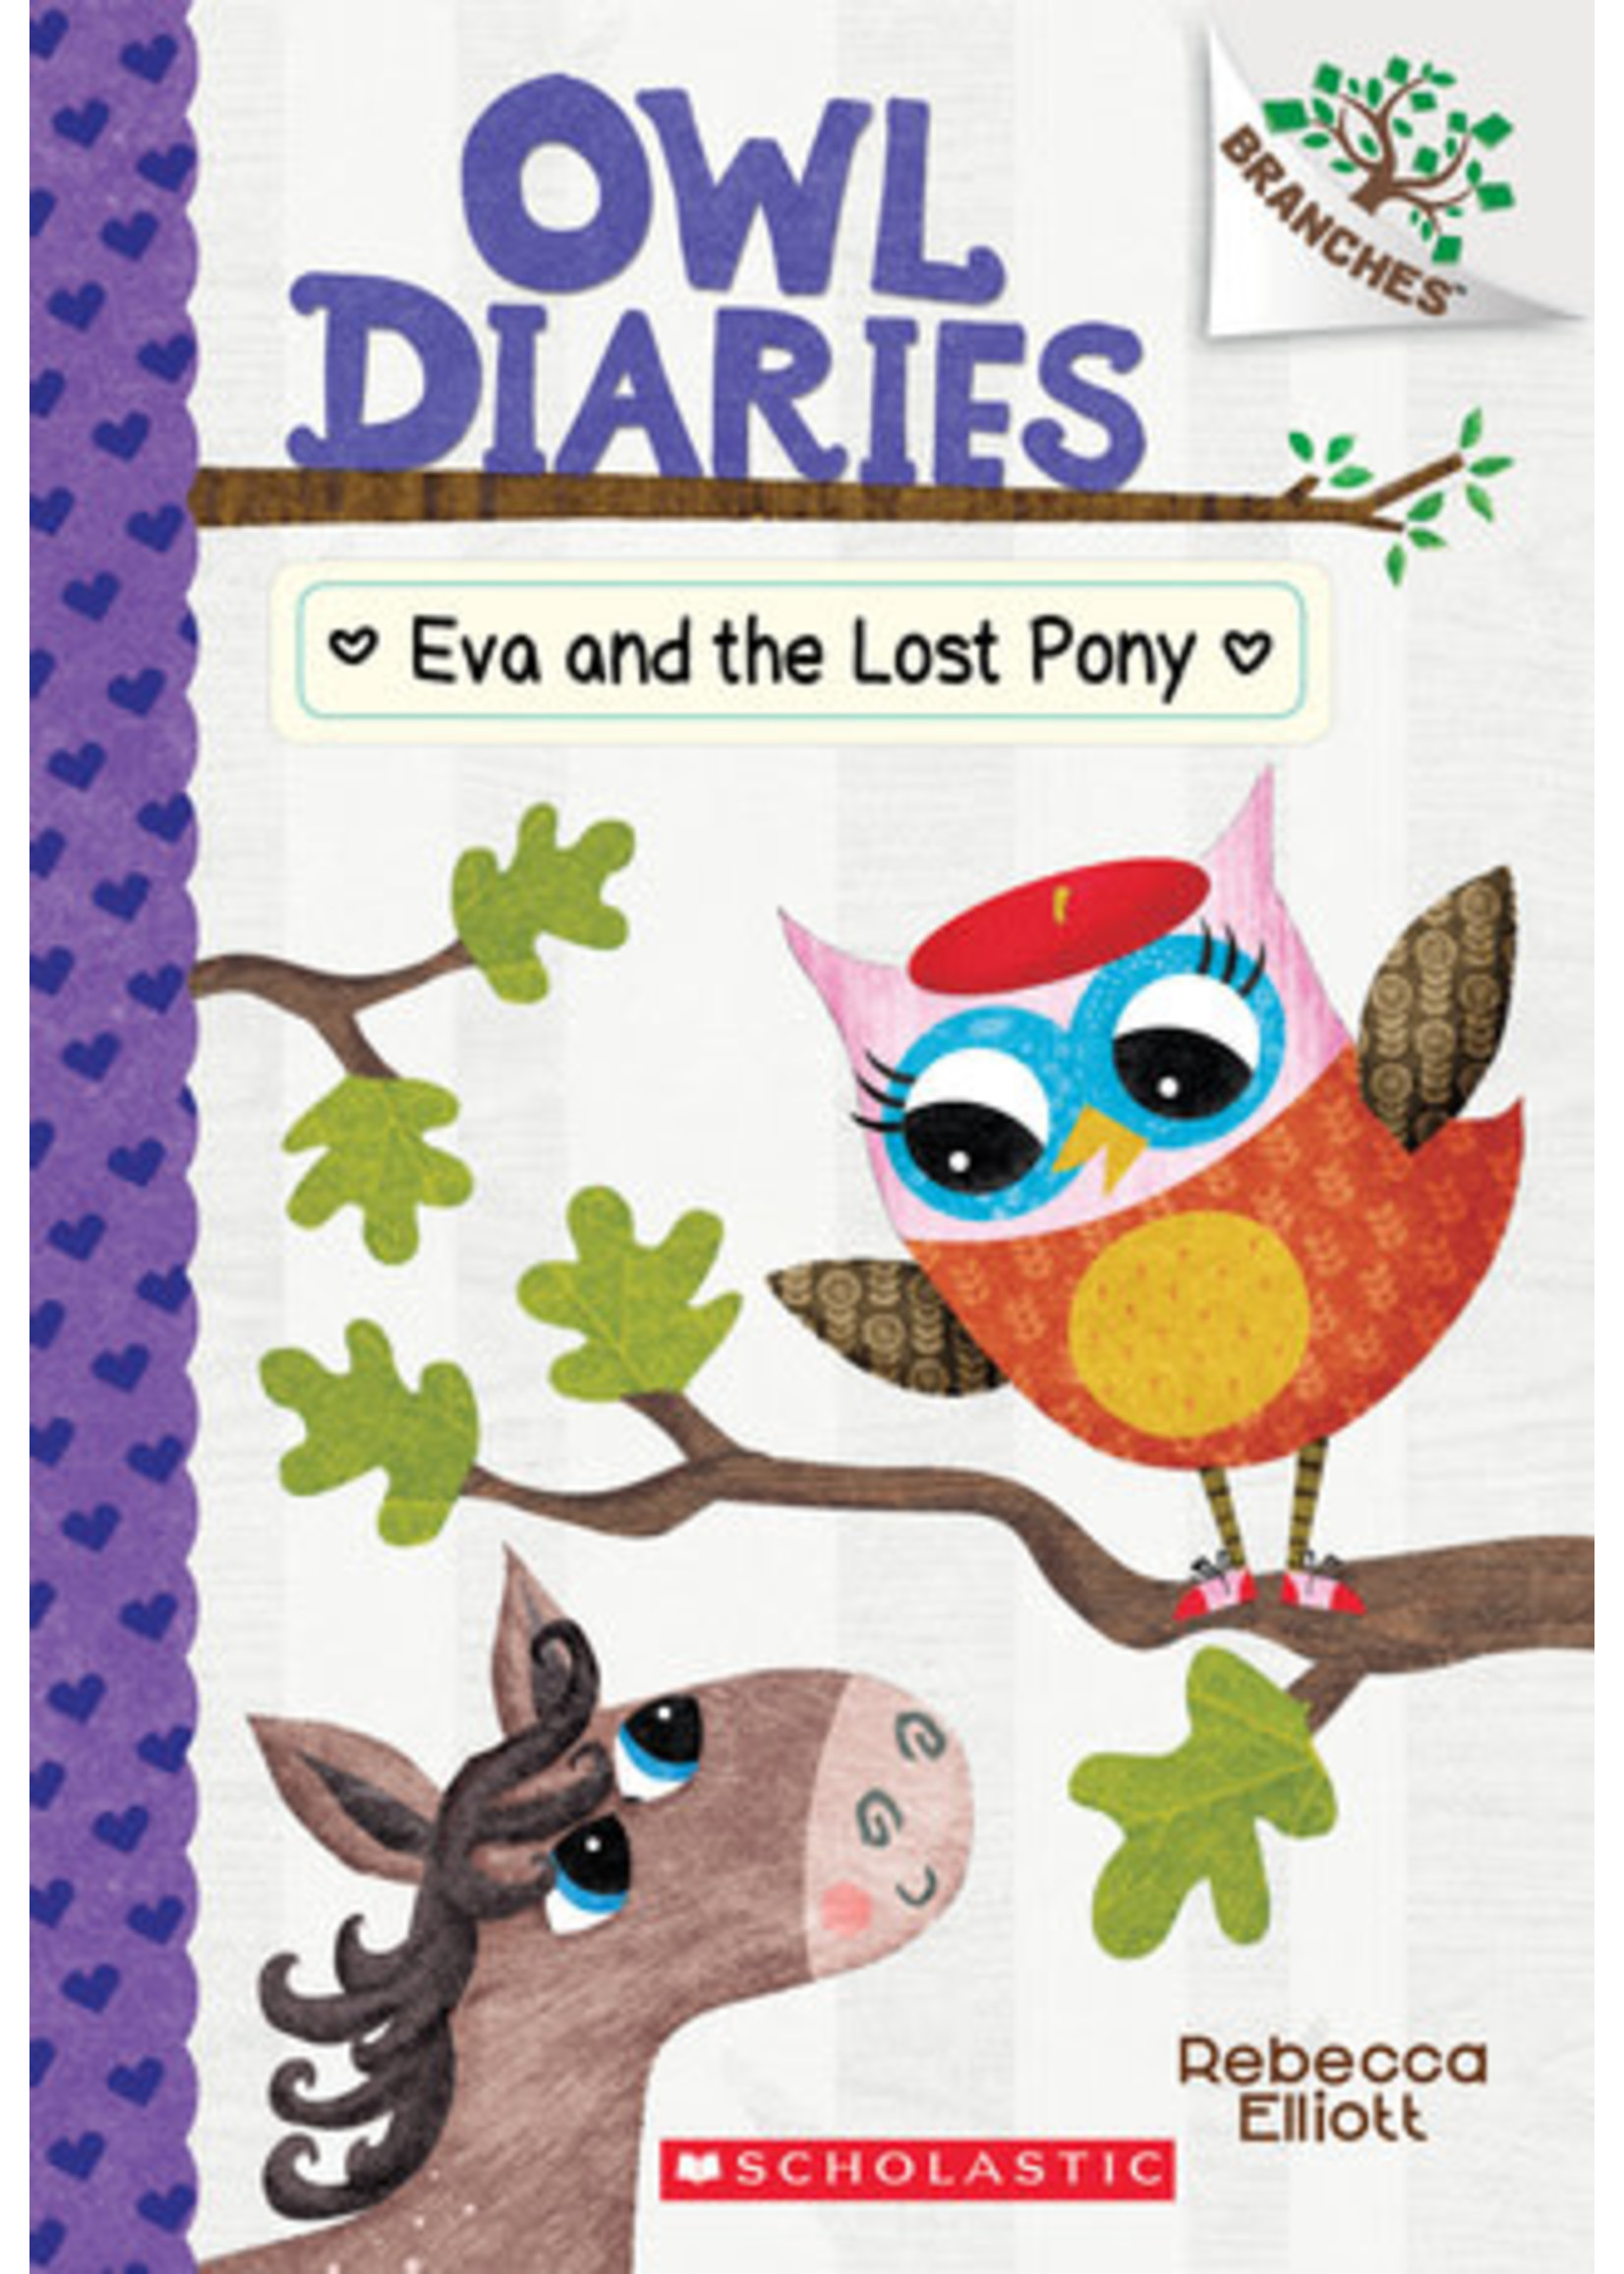 Eva and the Lost Pony (Owl Diaries #8) by Rebecca Elliot